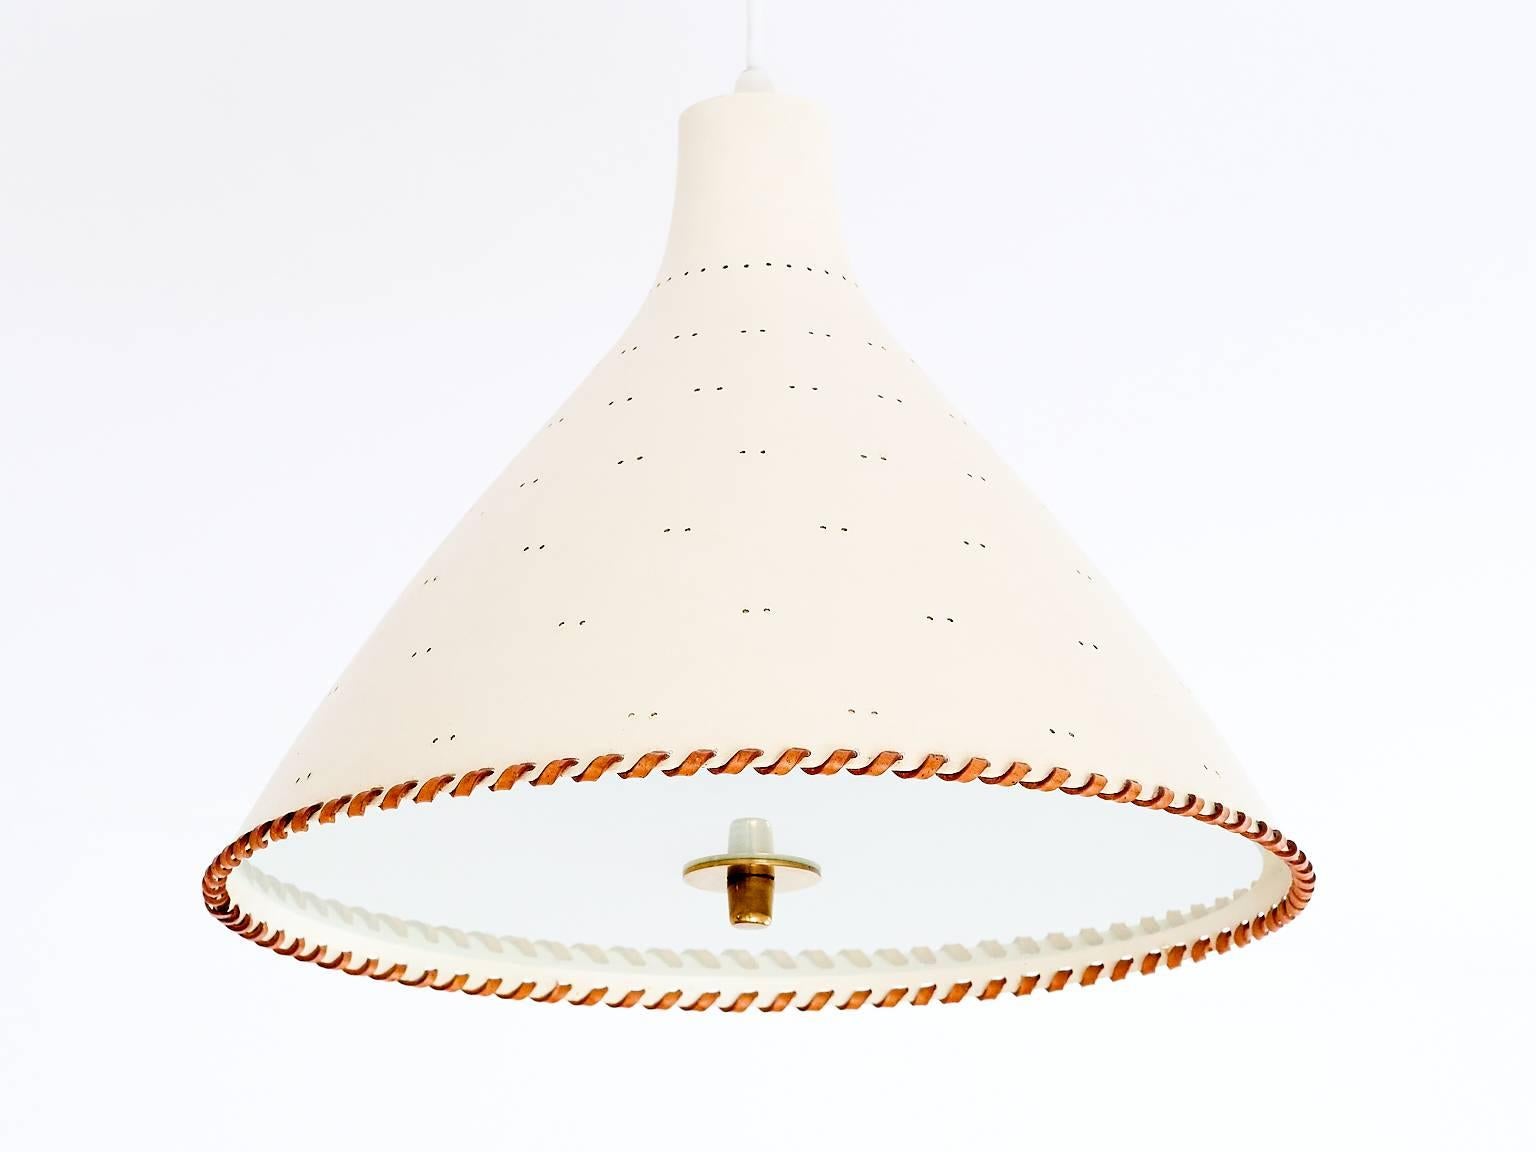 A rare pendant or ceiling lamp designed by Paavo Tynell and produced by Taito Oy in the early 1950s. The model number is J1982N and the lamp is marked with Taito. The pinhole perforations in the off-white or cream colored shade create a beautiful